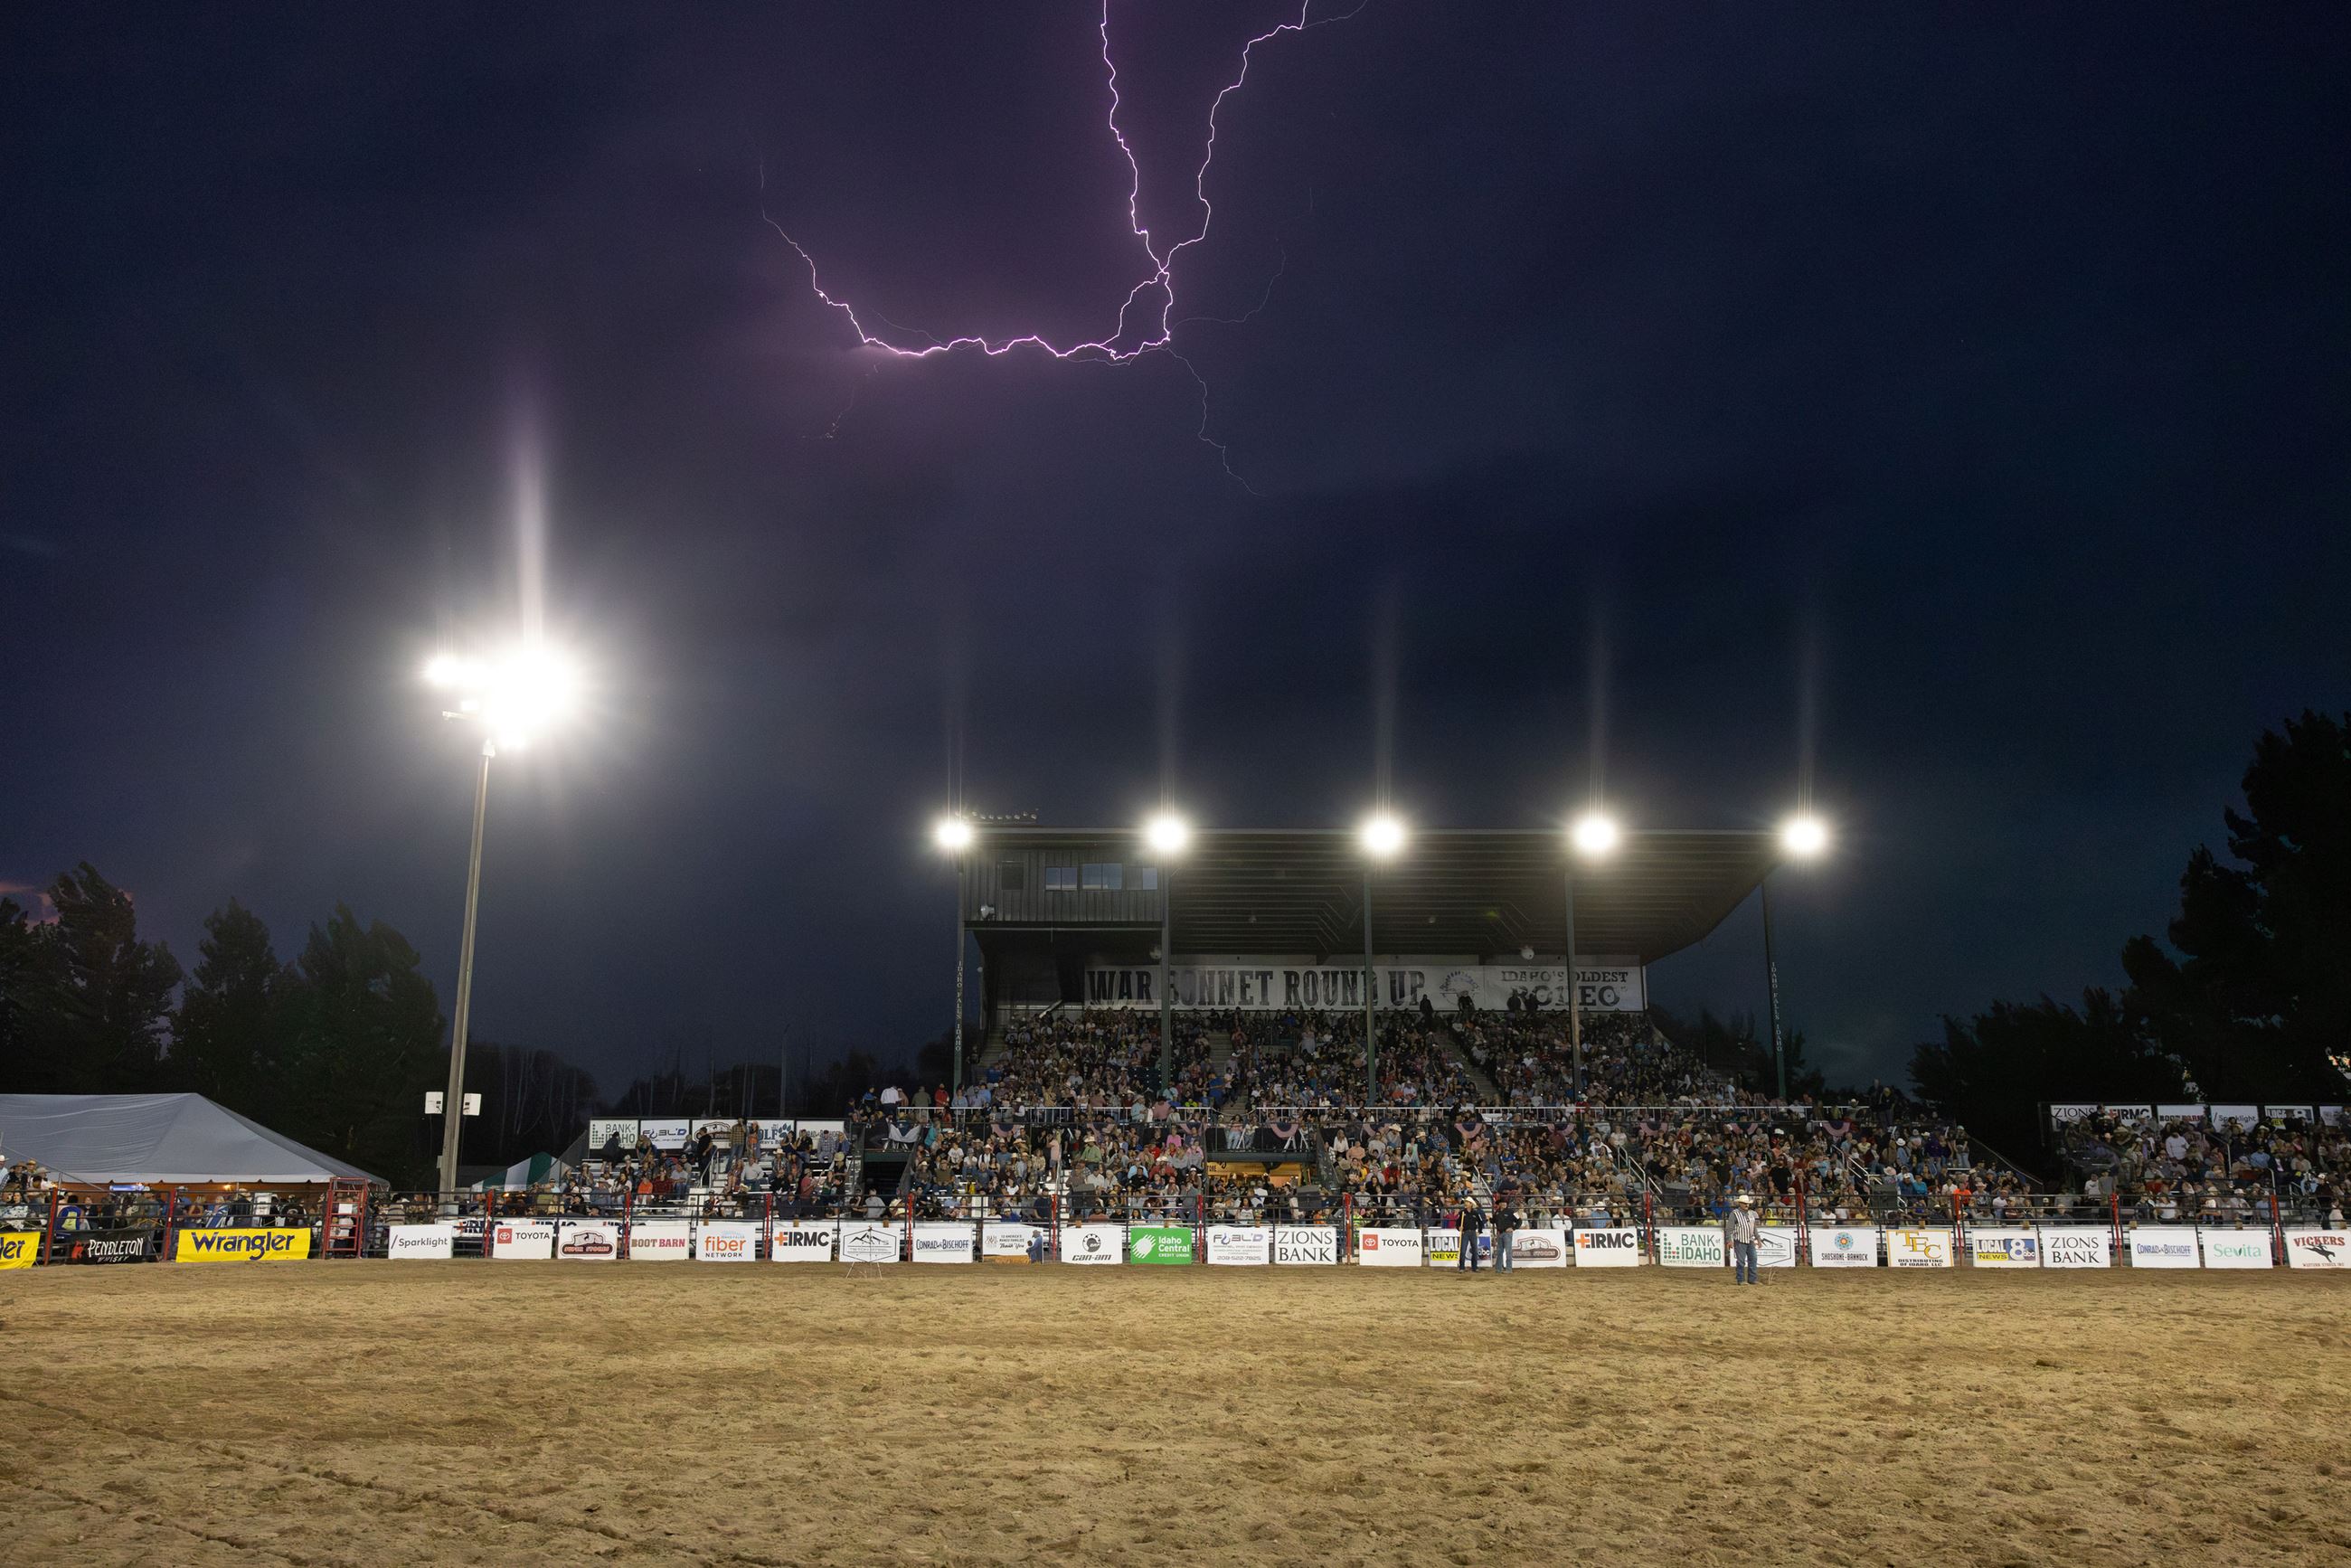   
																Only buy tickets from official sources for Idaho’s Oldest Rodeo – The War Bonnet Round Up 
															 